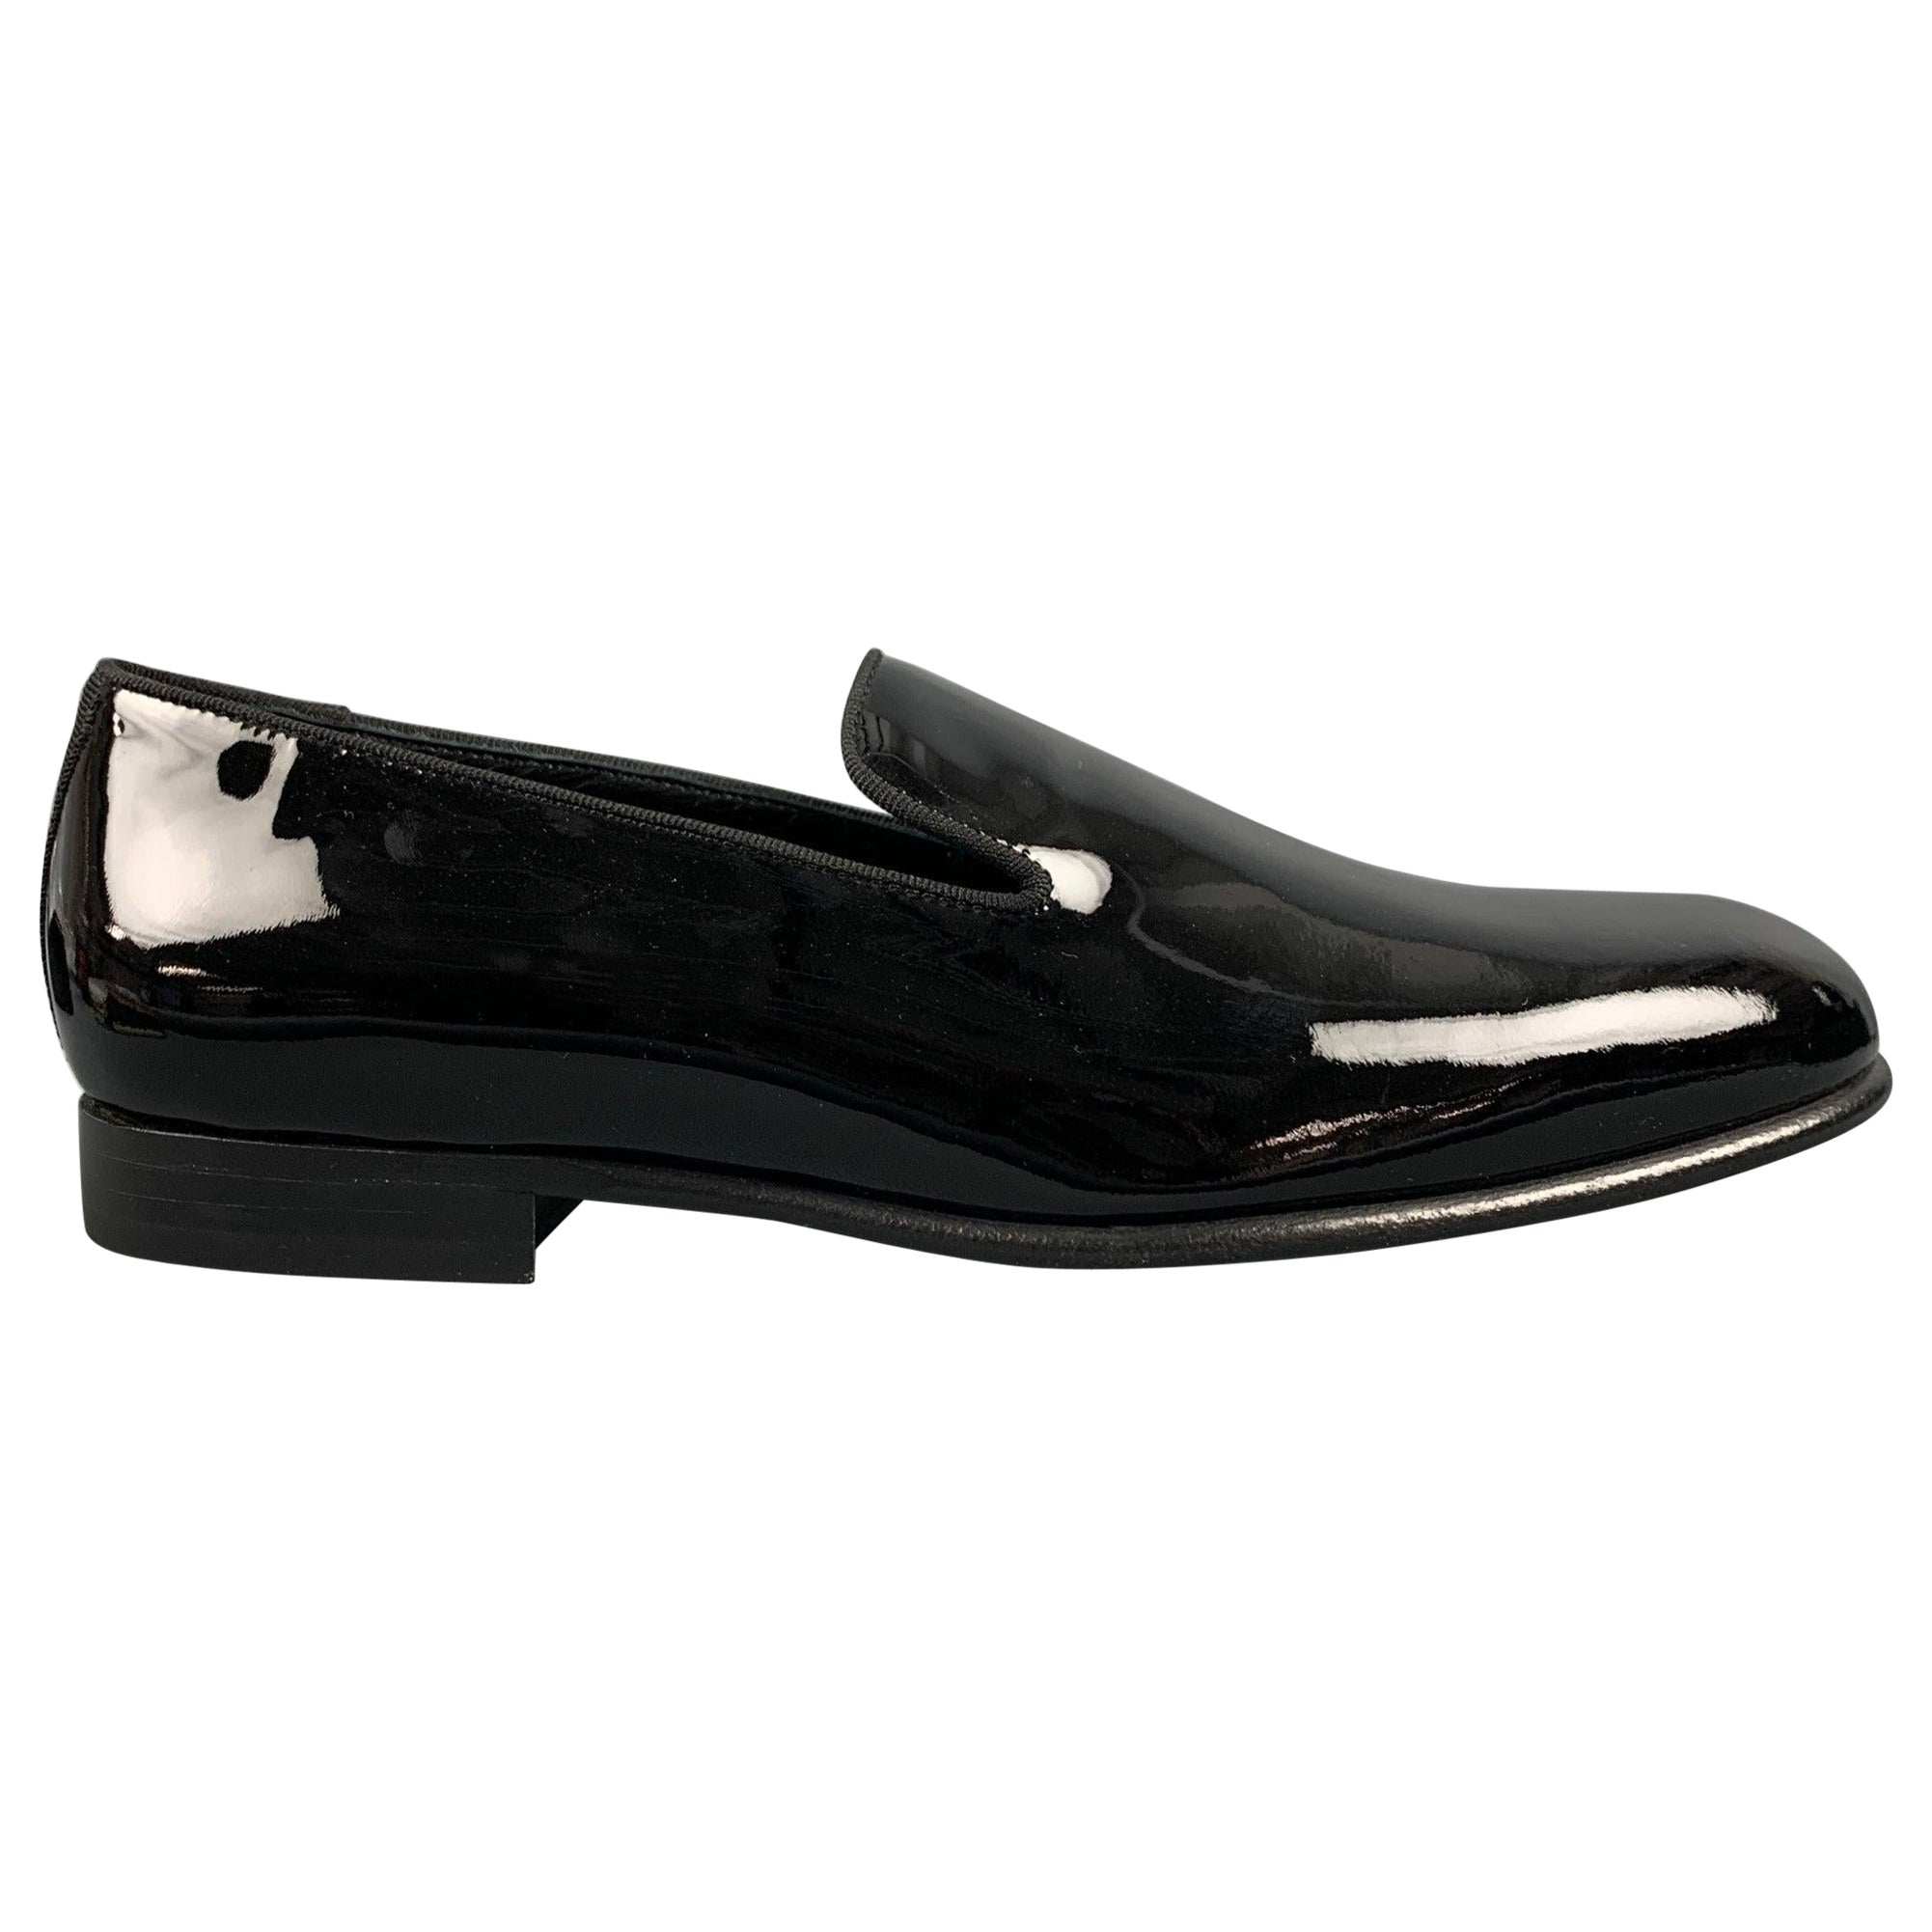 PAUL SMITH Size 7 Black Patent Leather Slip On Loafers For Sale